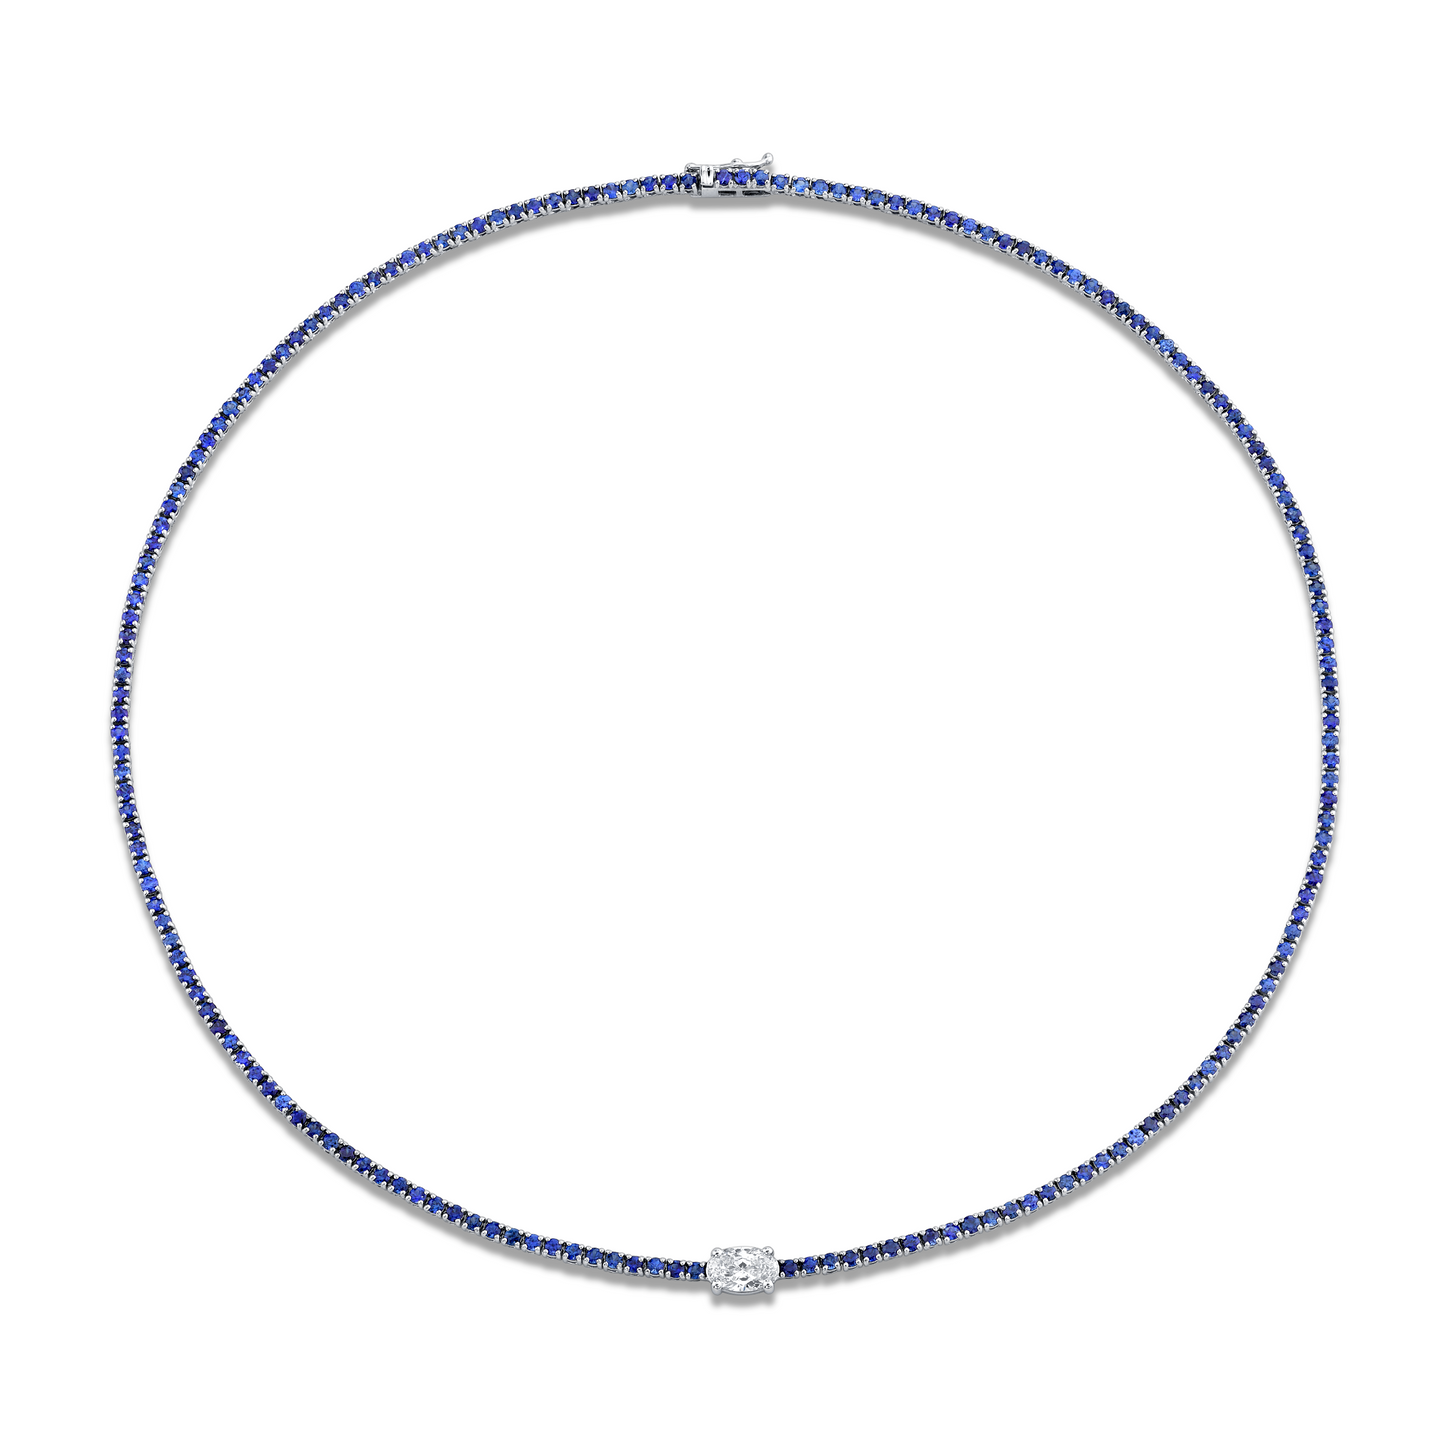 Straight Line Sapphire Necklace with Diamond Accent